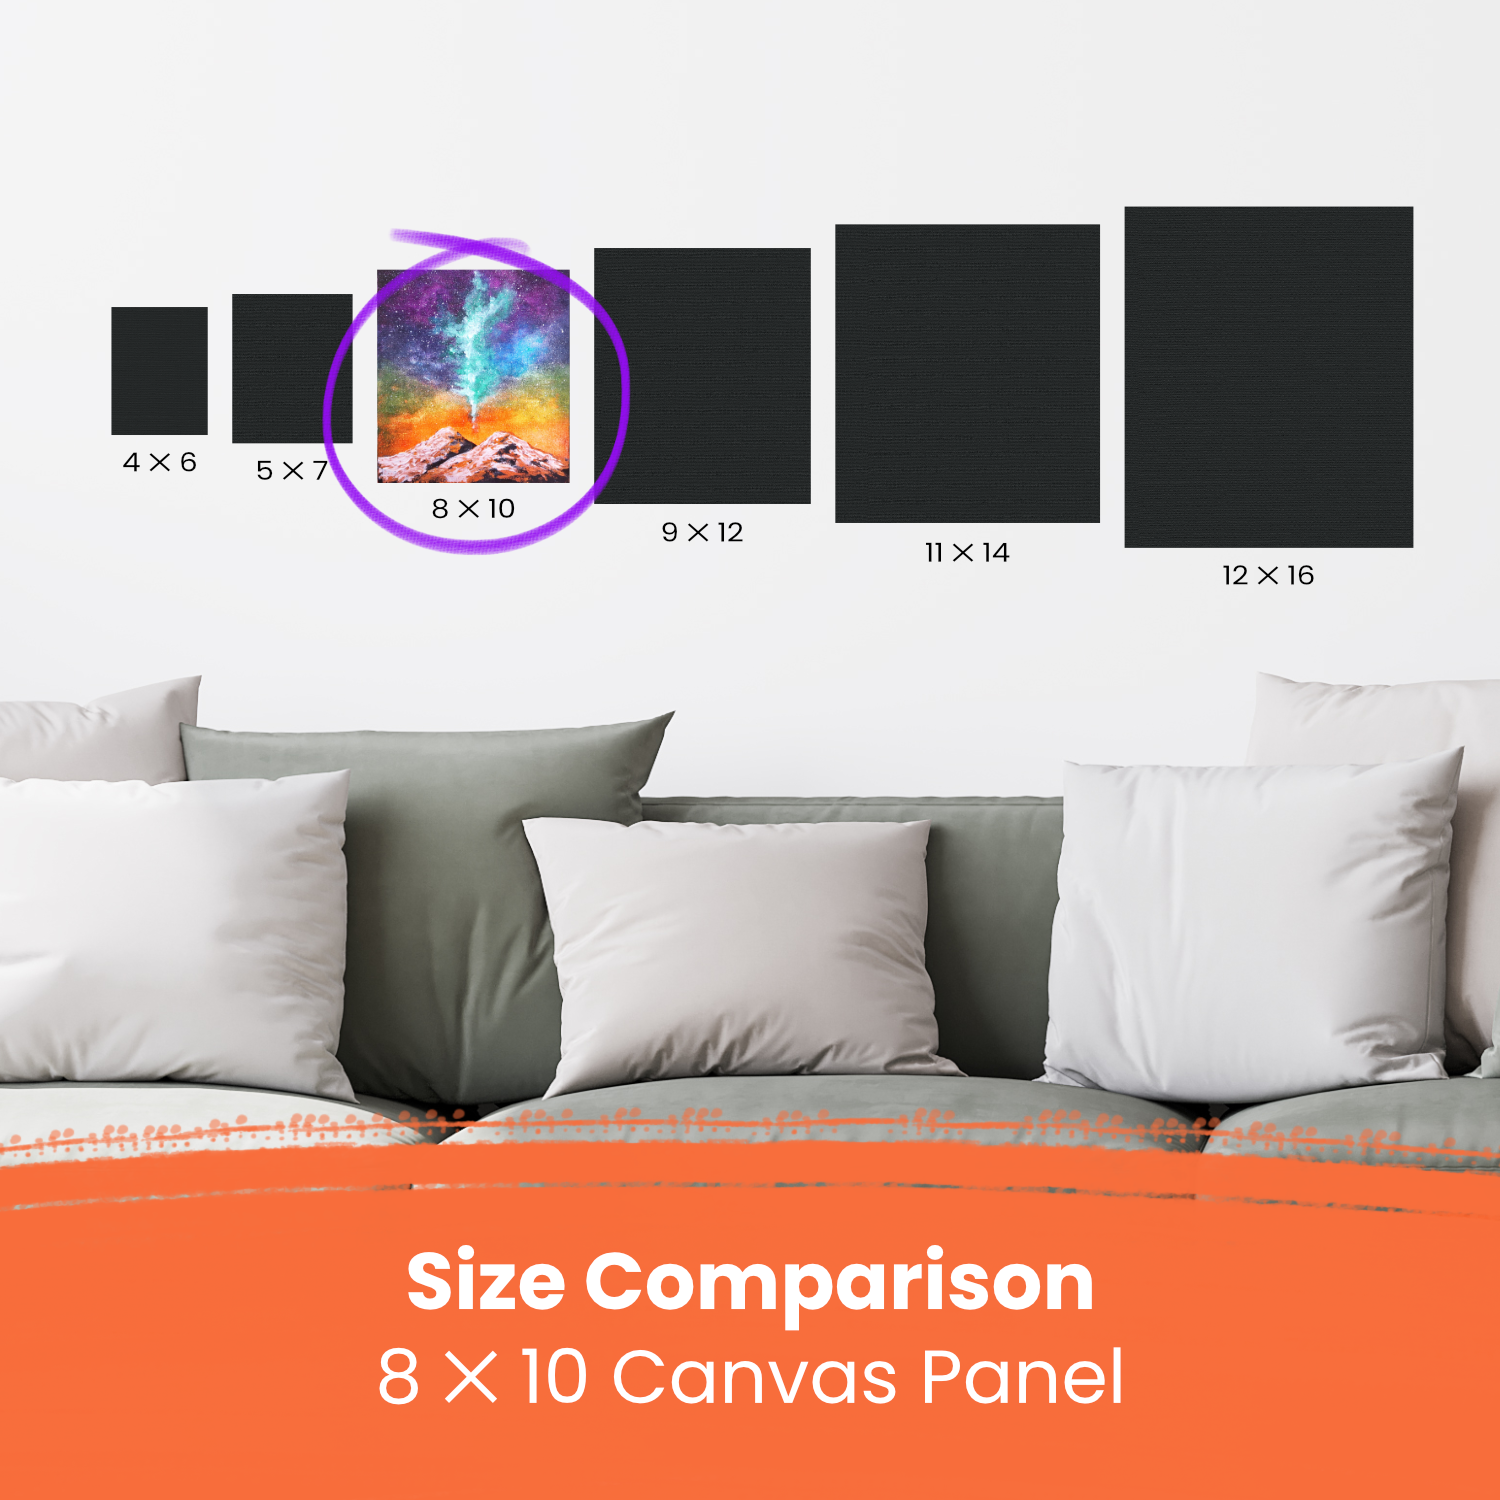 Canvas Panel Board: Best Types, Sizes & Comparison Overview! 